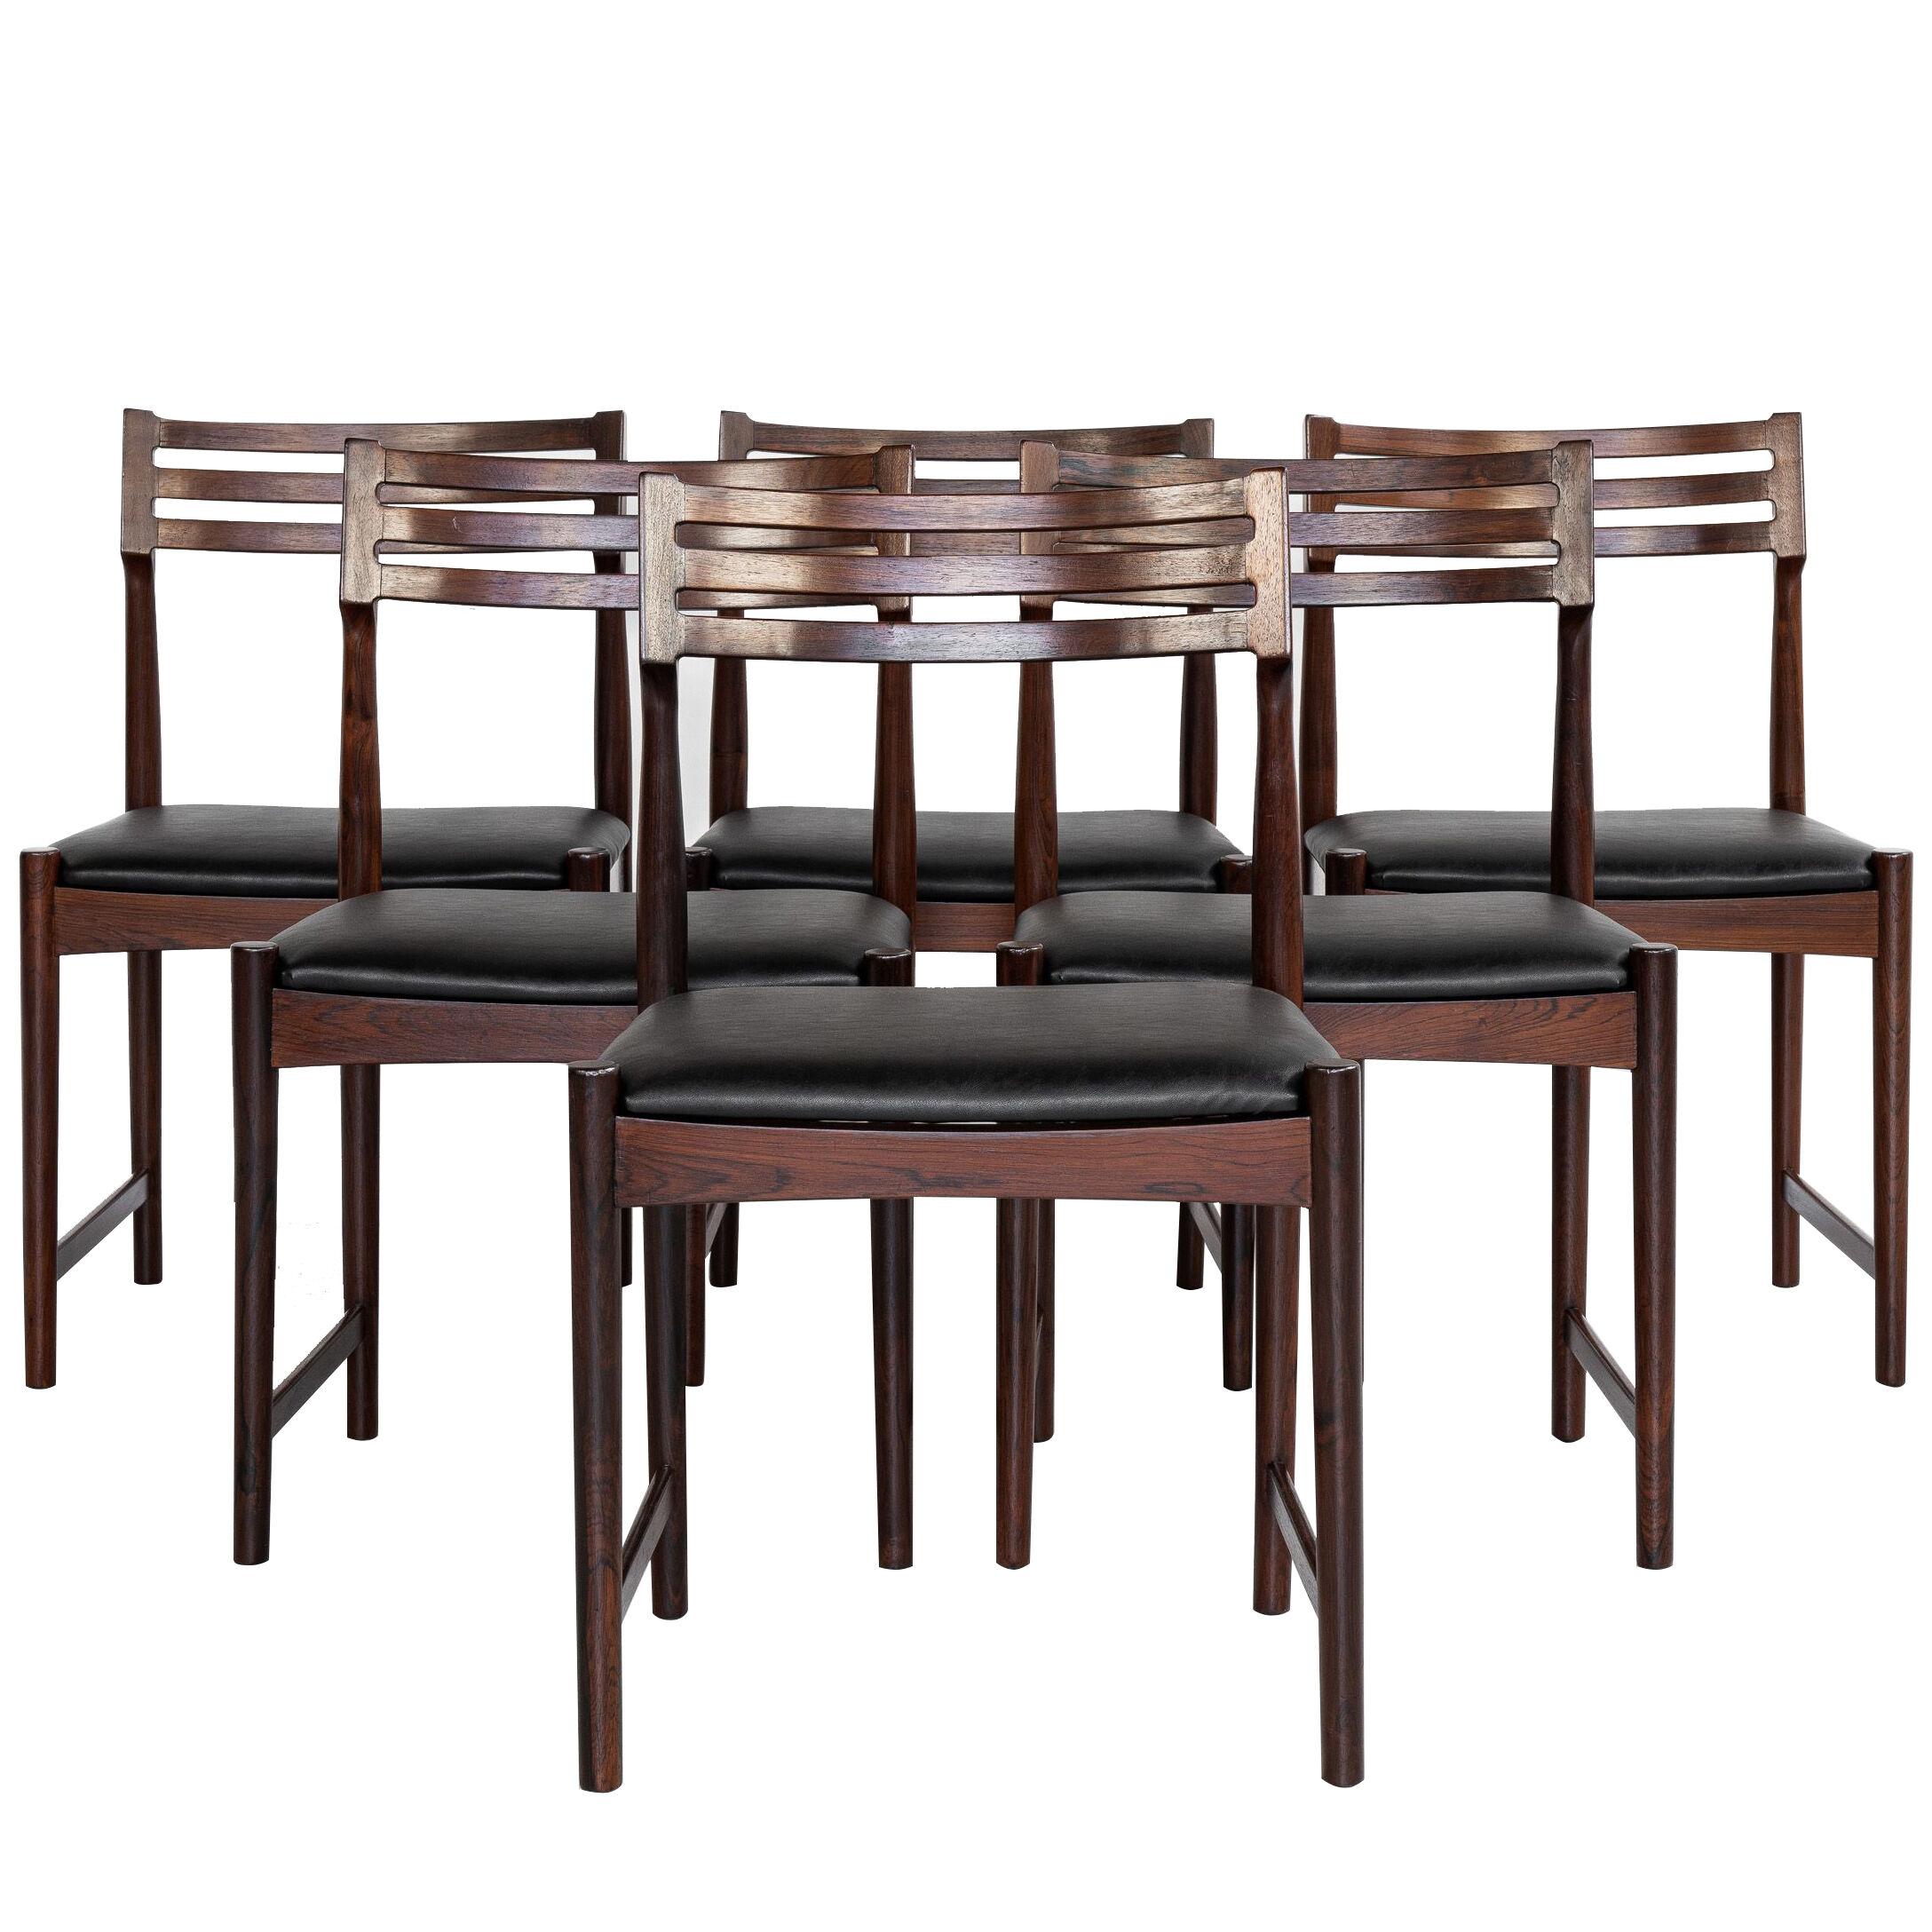 Midcentury set of 6 dining chairs in rosewood by Severin Hansen for Bovenkamp